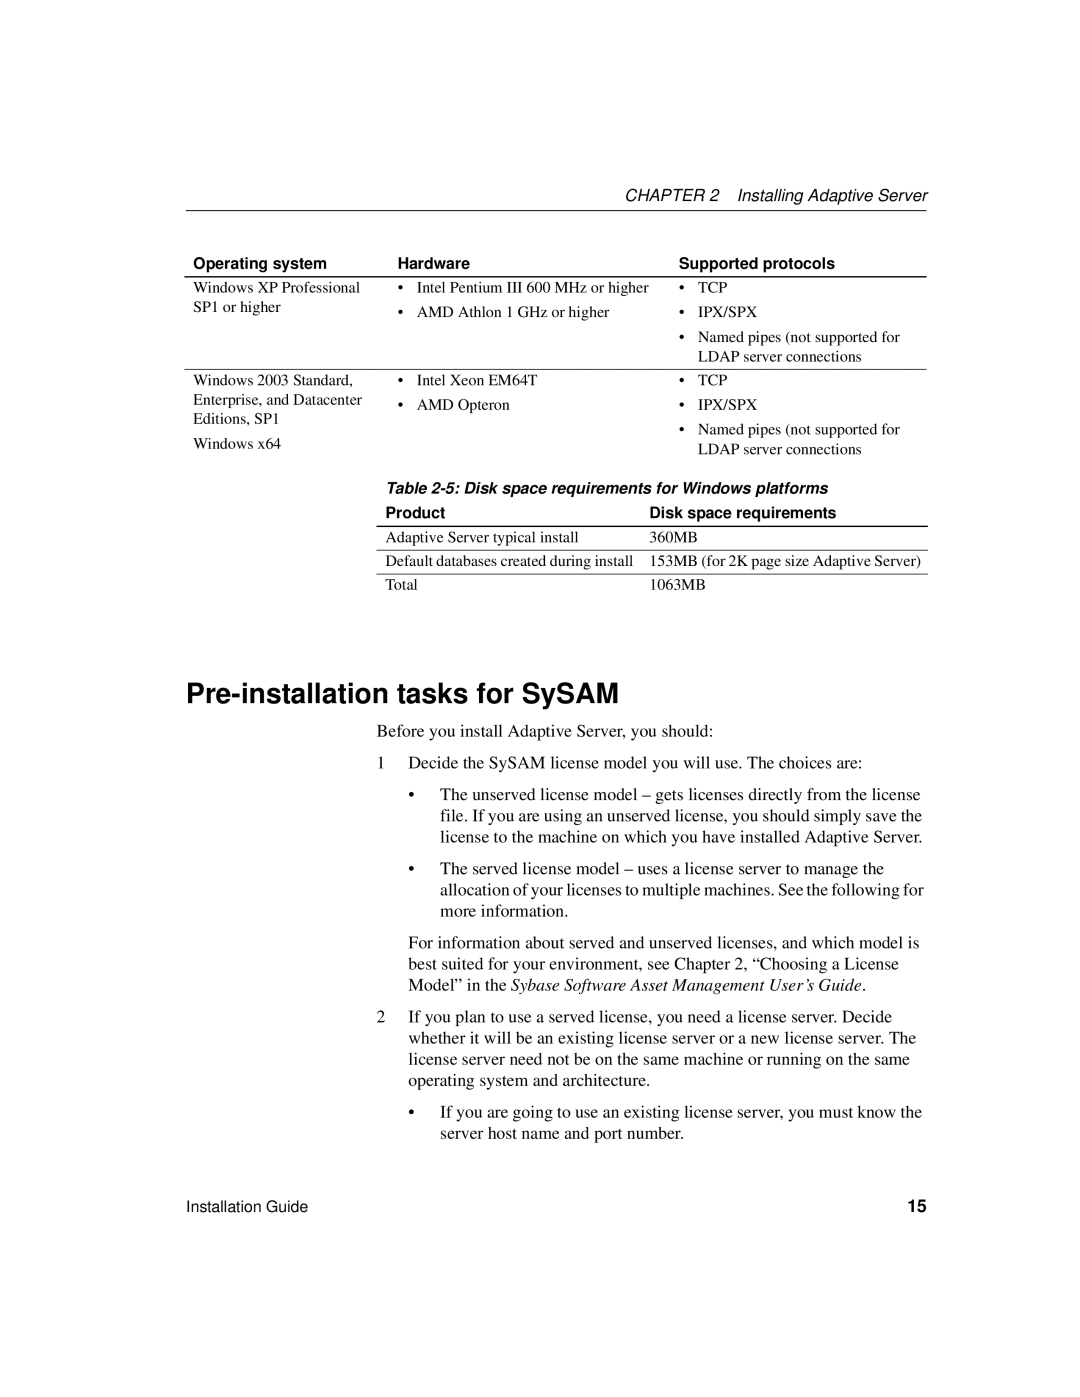 Sybase 15.0.2 Pre-installation tasks for SySAM, Installing Adaptive Server, Disk space requirements for Windows platforms 